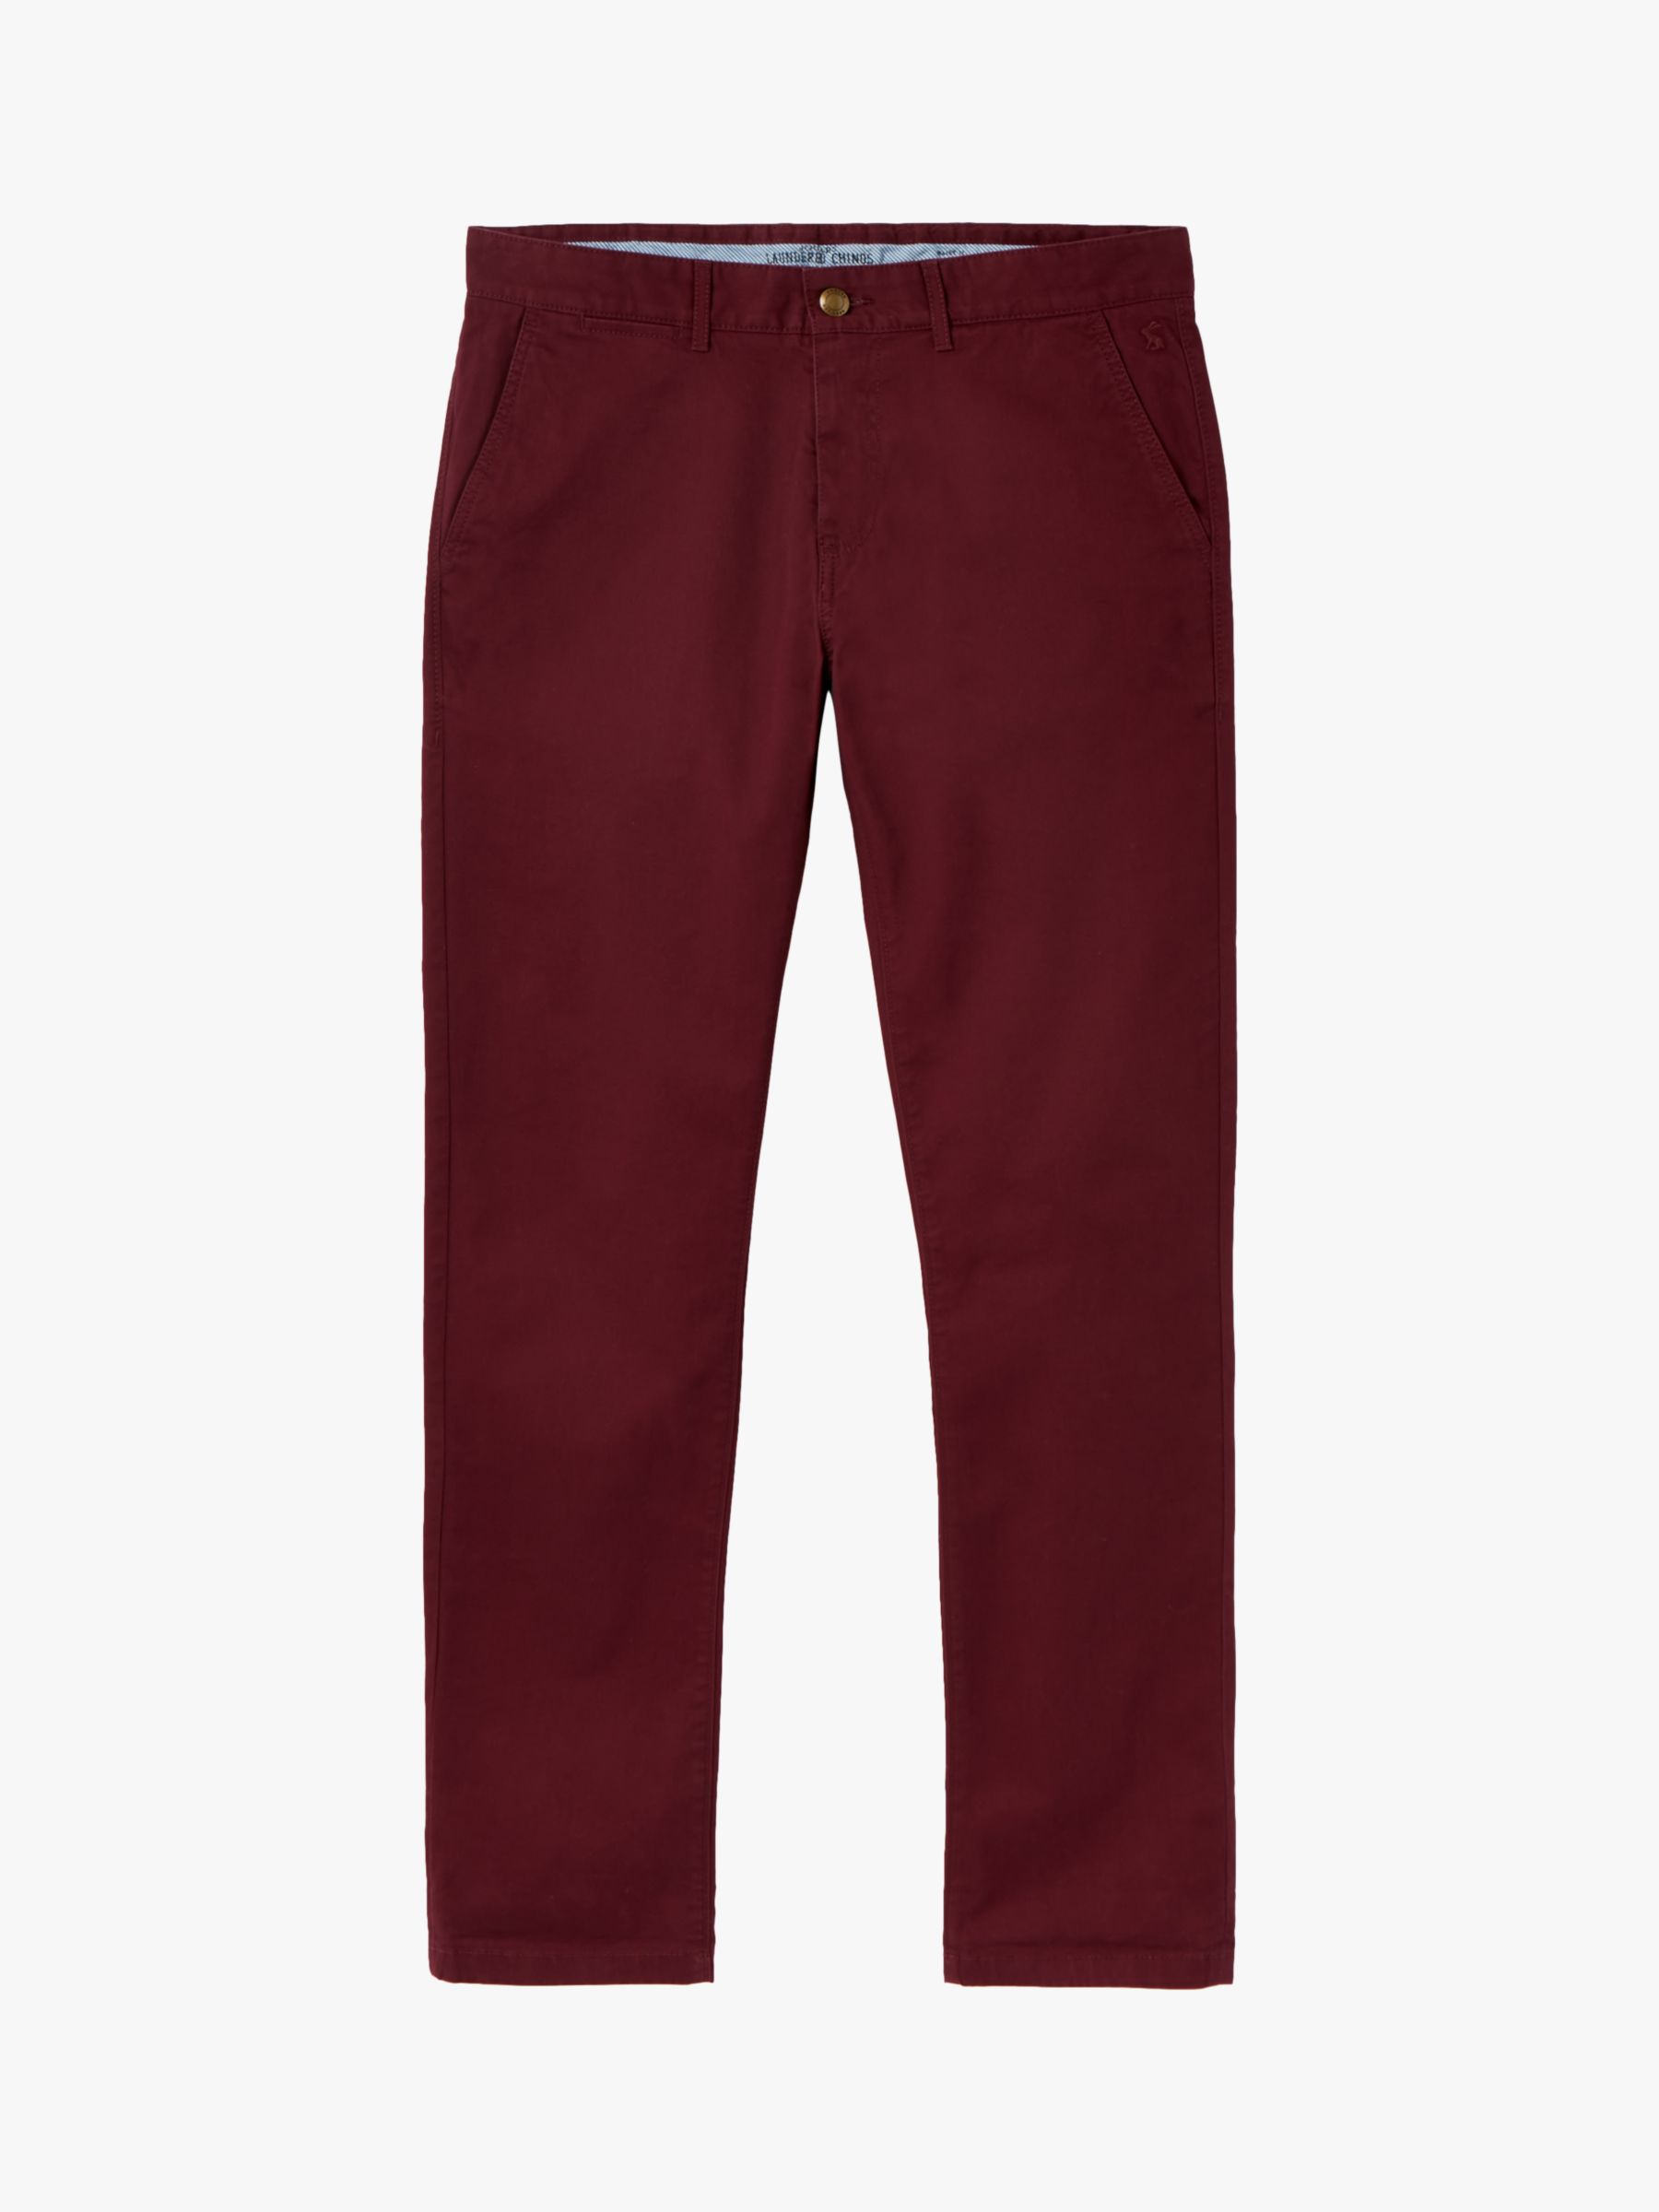 Joules Slim Fit Chinos, Fig Red, 34L